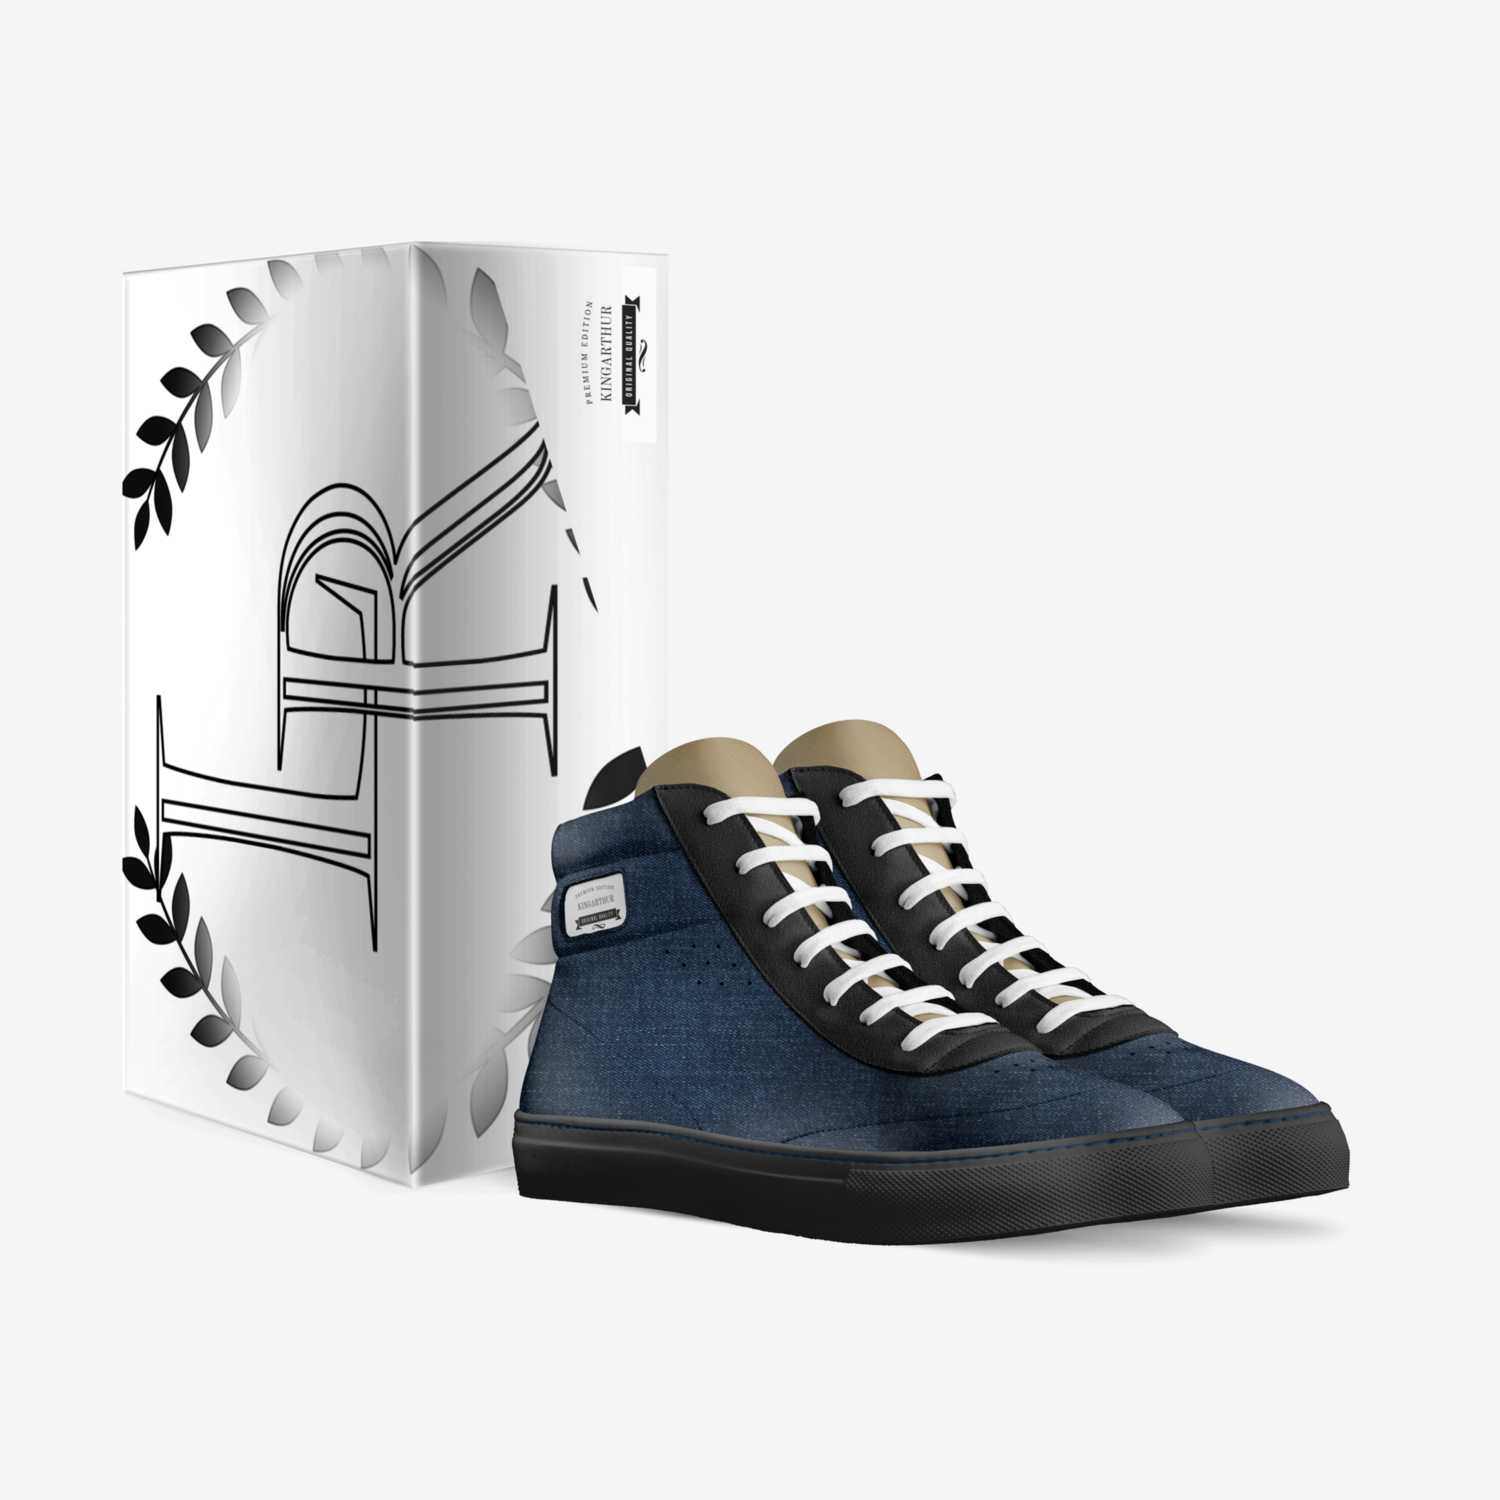 KingArthur custom made in Italy shoes by Limitlessroyalty Brand | Box view